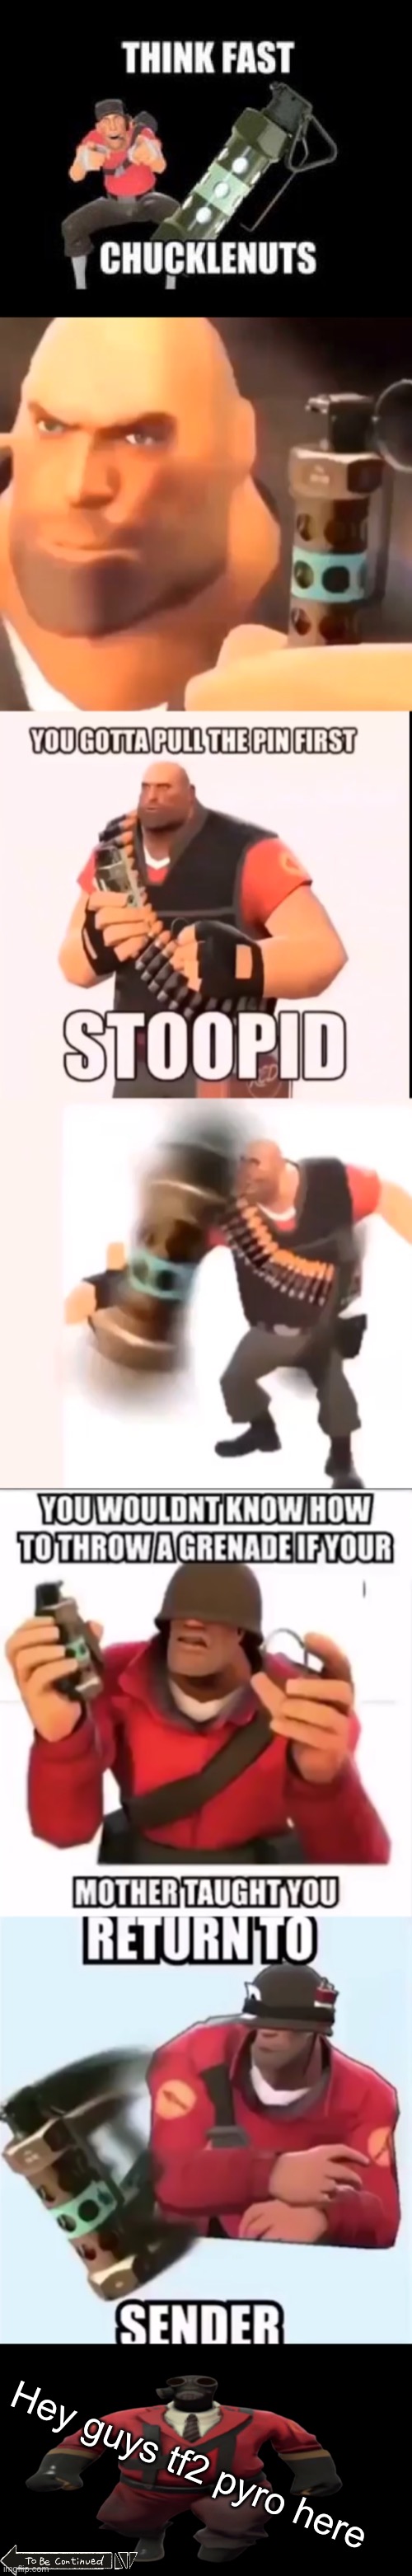 Hey guys tf2 pyro here | image tagged in think fast chucklenuts,you gotta pull the pin first stoopid,return to sender,''hey guys tf2 pyro here'' but better | made w/ Imgflip meme maker